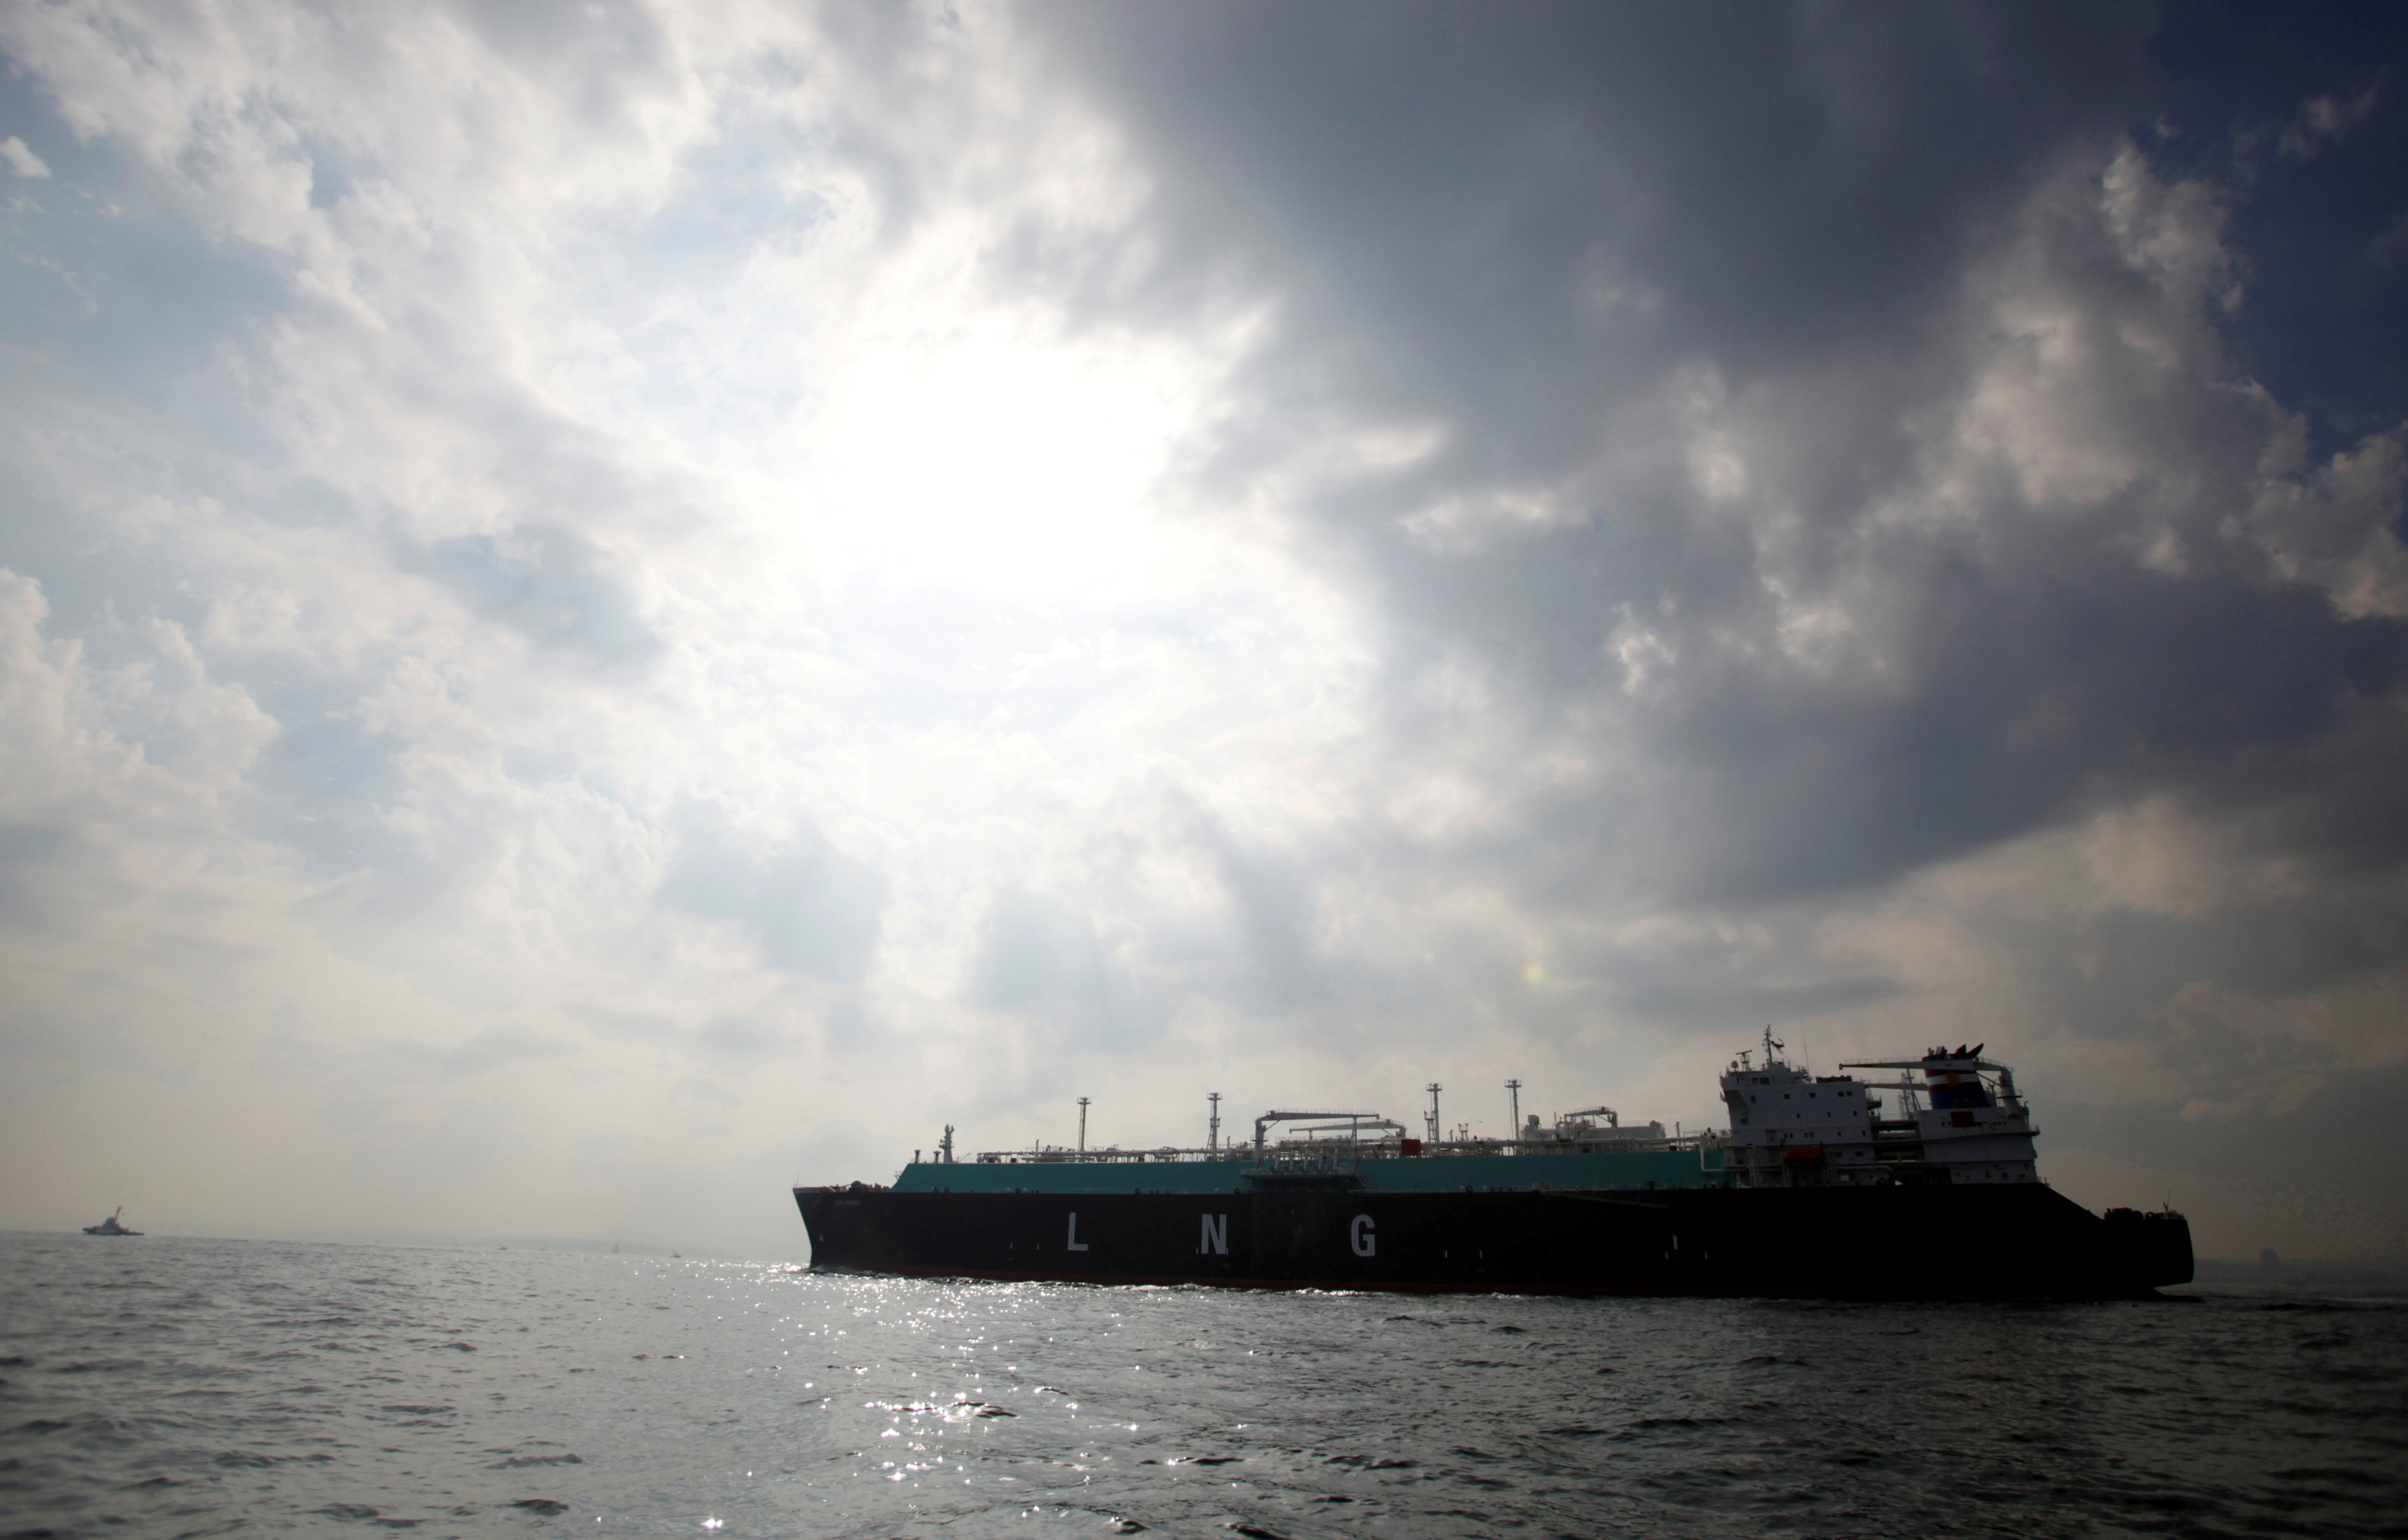 A liquefied natural gas (LNG) carrying vessel sails at Tokyo Bay, offshore of Yokosuka, south of Tokyo, Japan October 22, 2012. (Issei Kato / Reuters File Photo)